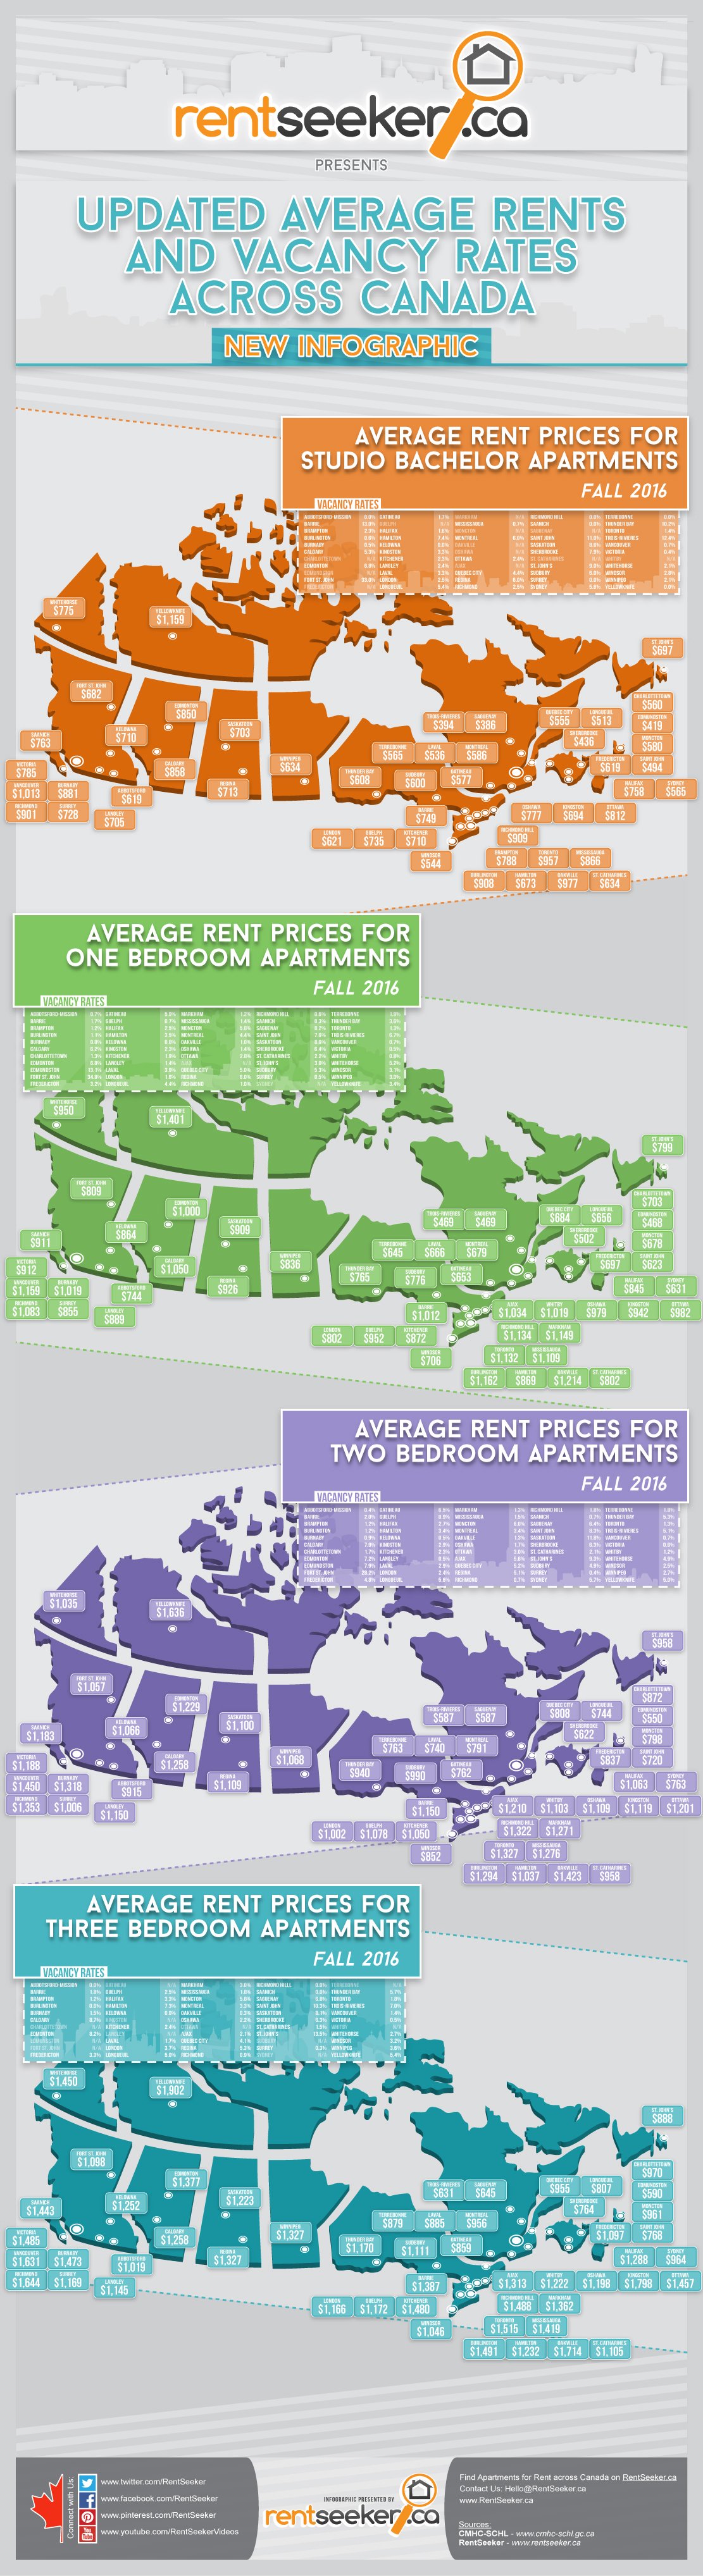 New INFOGRAPHIC by RentSeeker Showing Updated Costs of Rent and Average Vacancy Rates across Canada